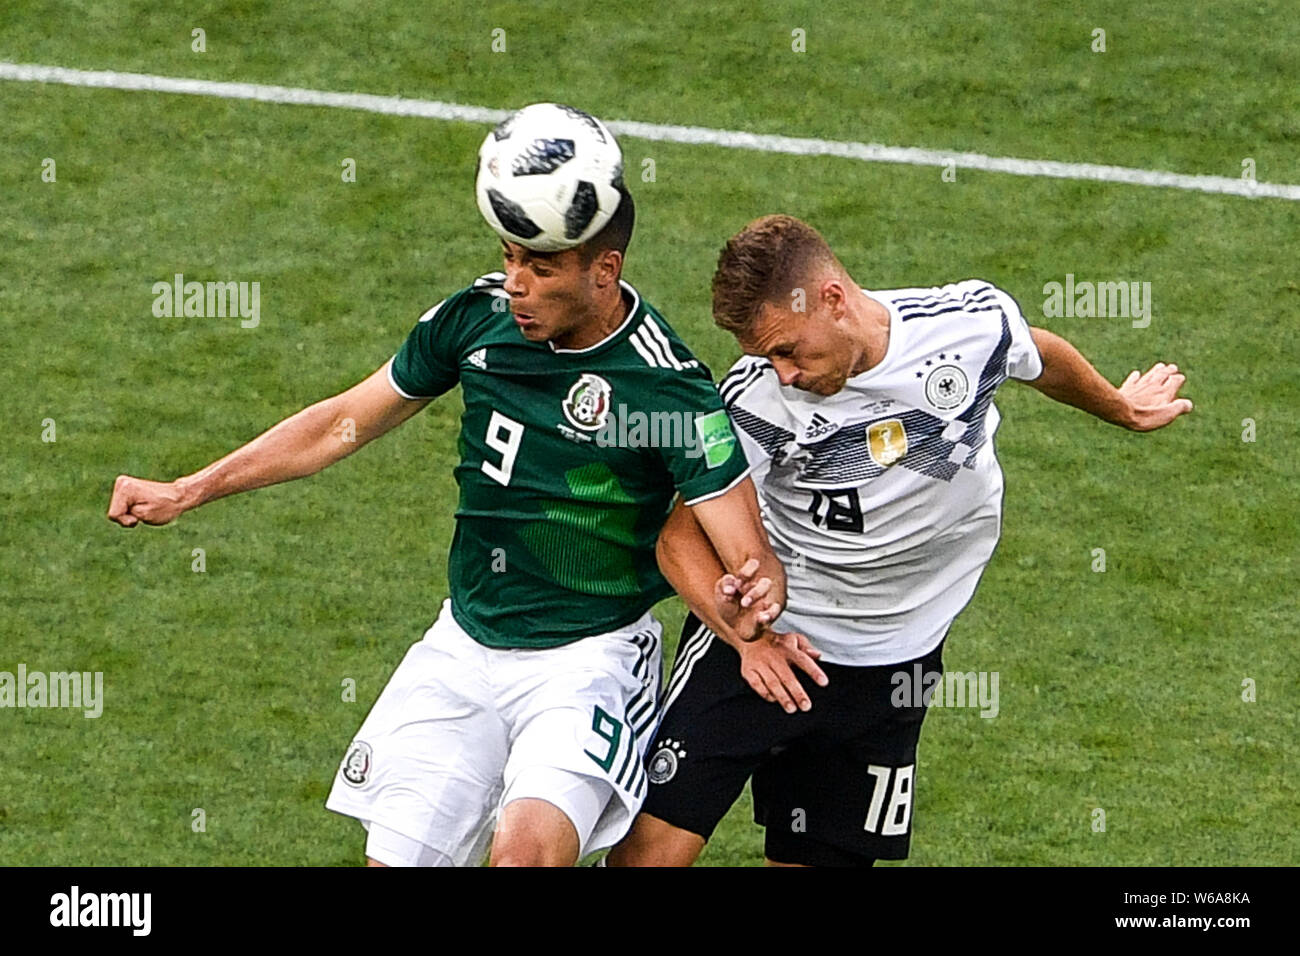 Raul Jimenez of Mexico, left, heads the ball against Joshua Kimmich of Germany in their Group F match during the 2018 FIFA World Cup in Moscow, Russia Stock Photo